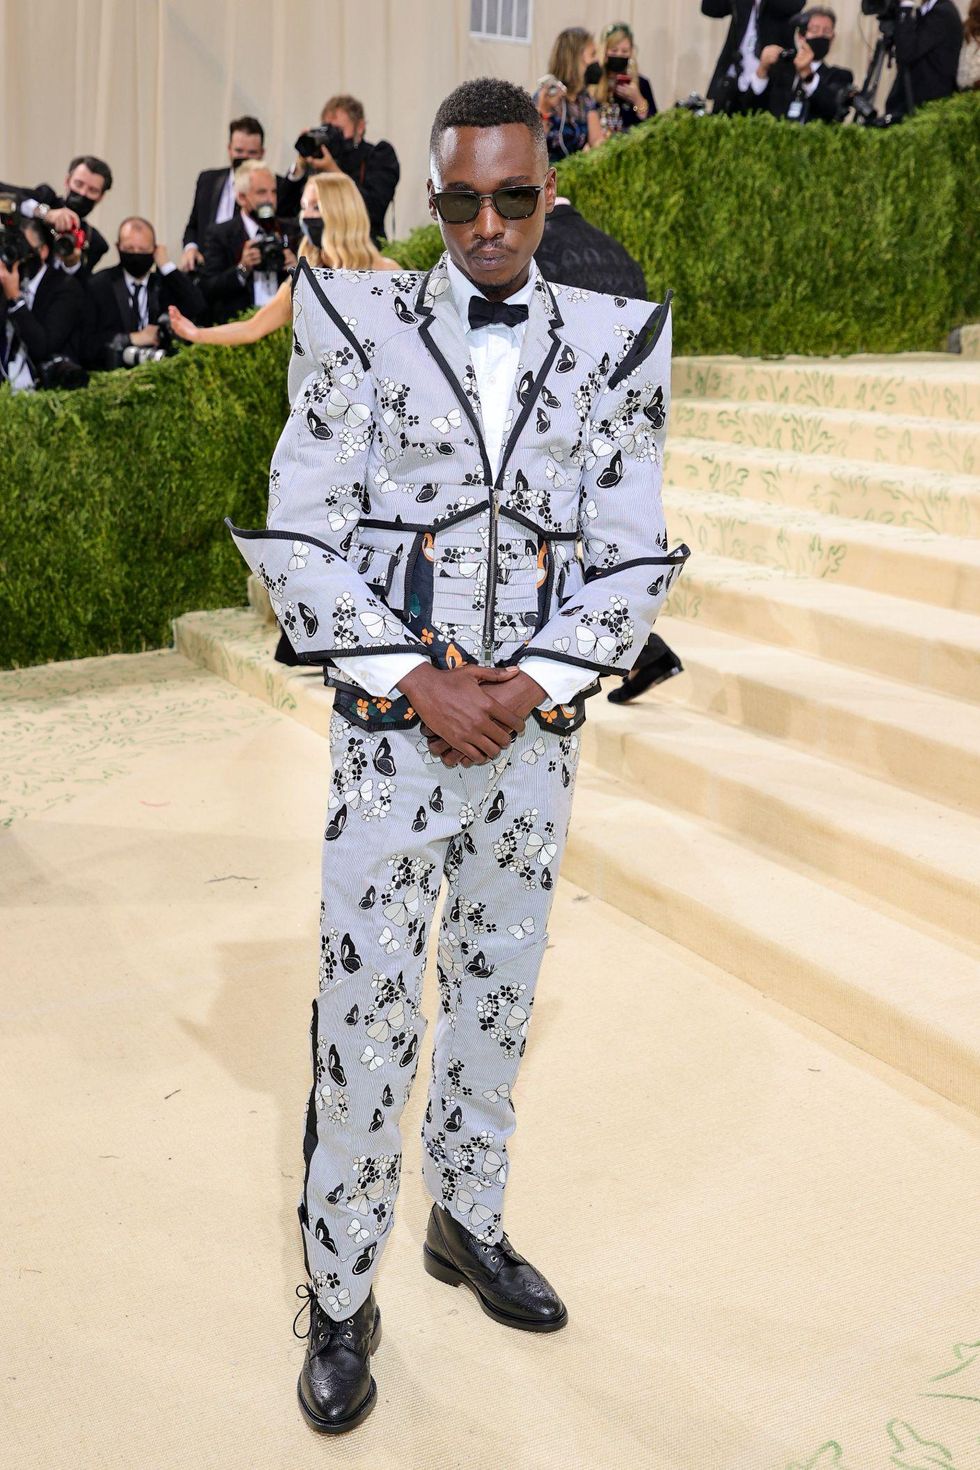 9 Men Who Didn't Wear Black Tuxedos to the 2021 Met Gala